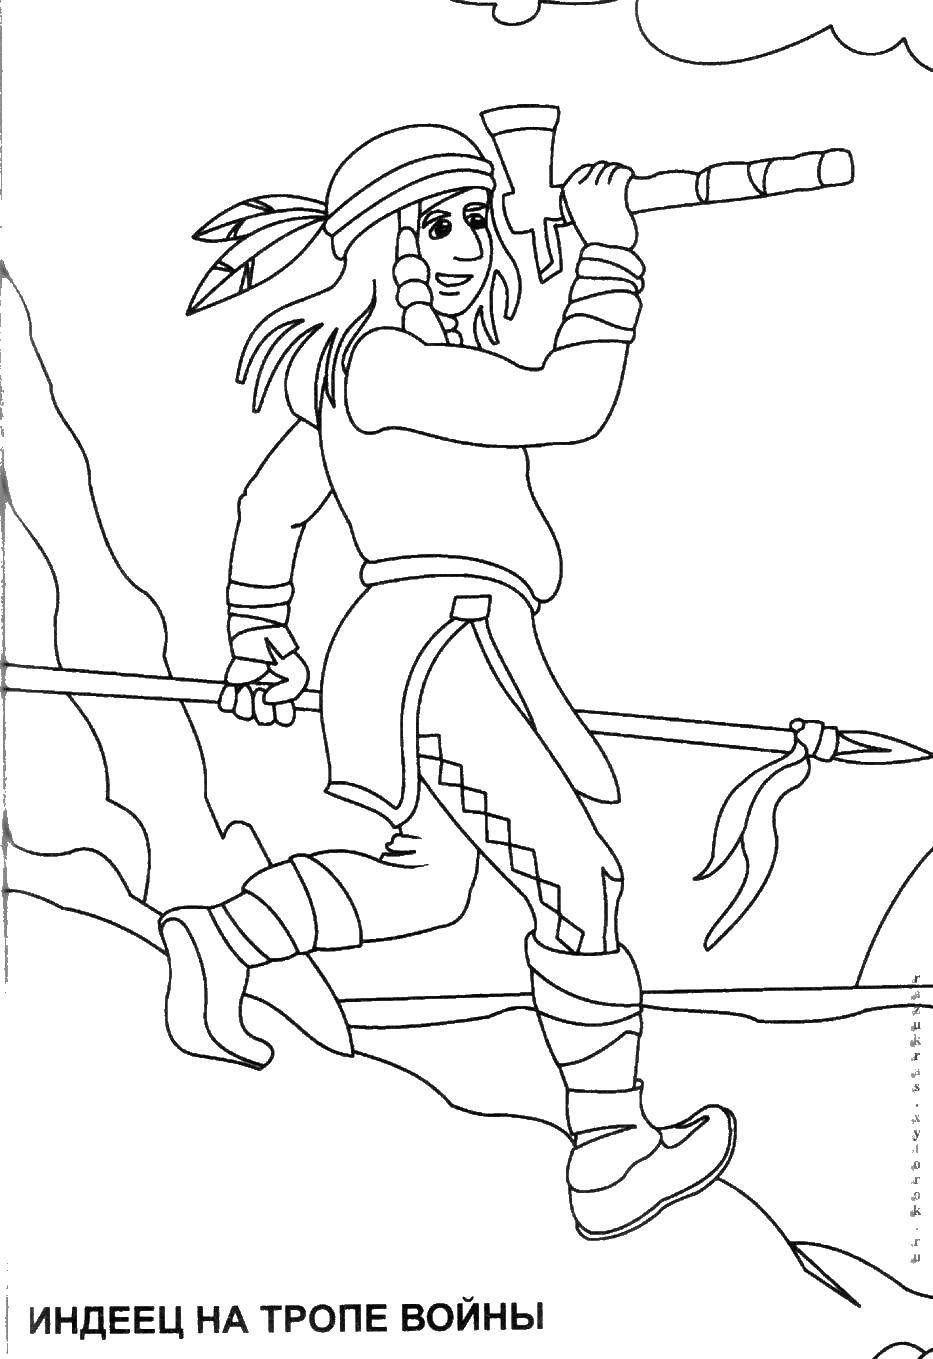 Coloring Warrior Indian. Category for boys . Tags:  Warrior , Indian.